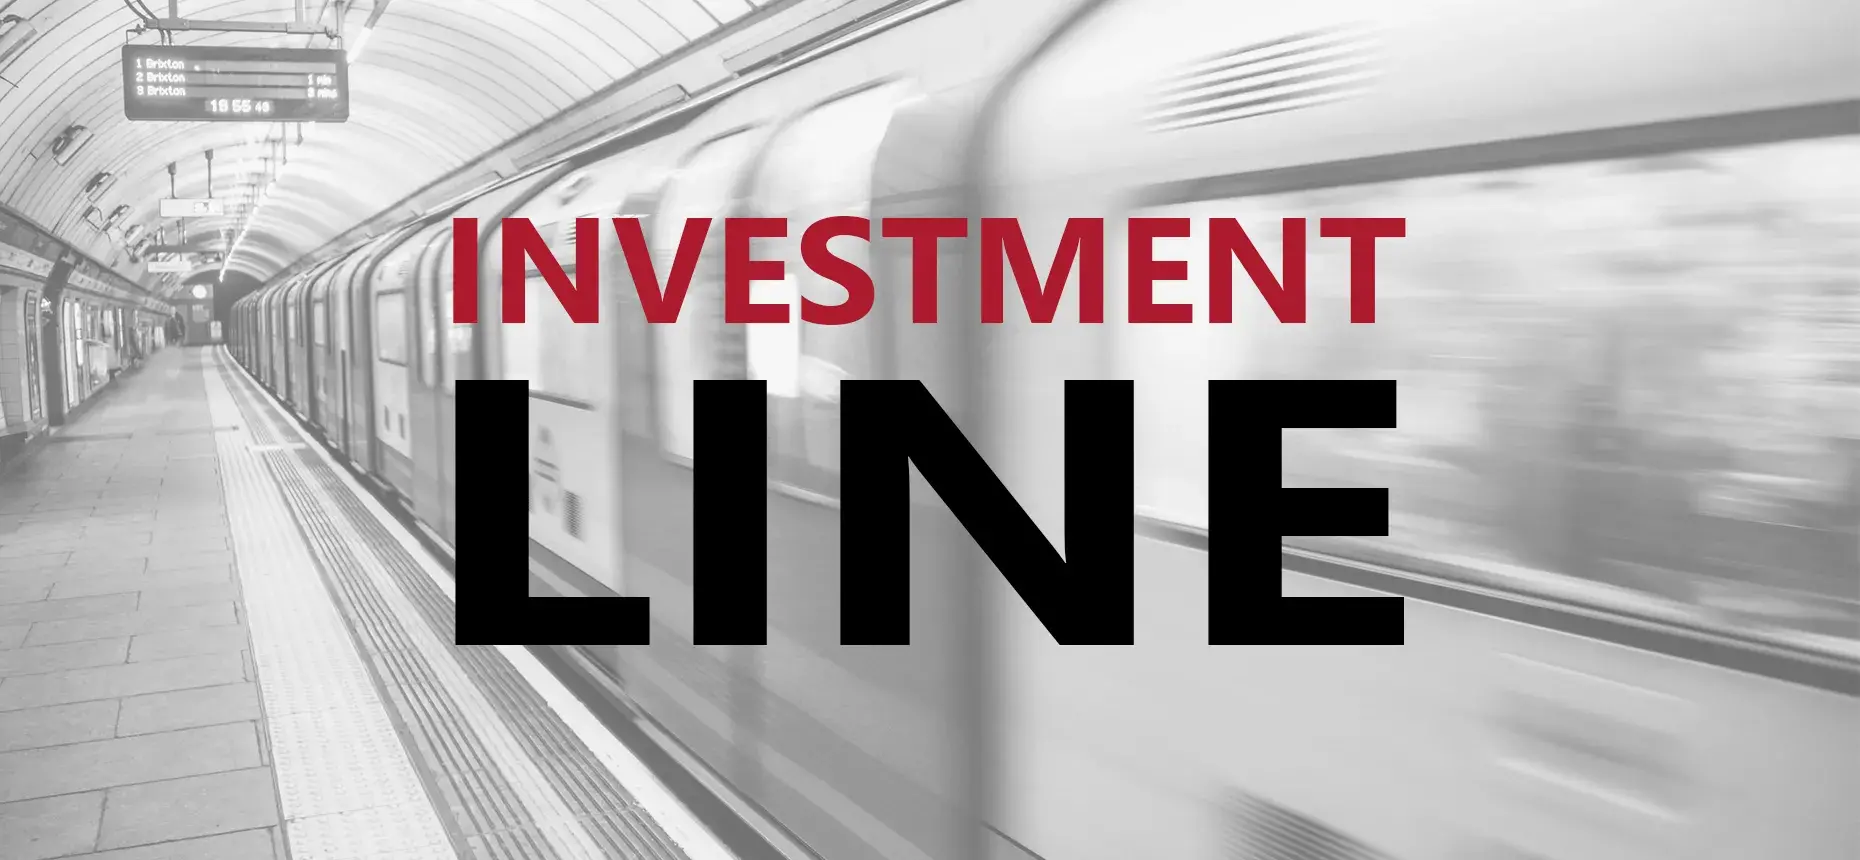 Investment line - march 2021